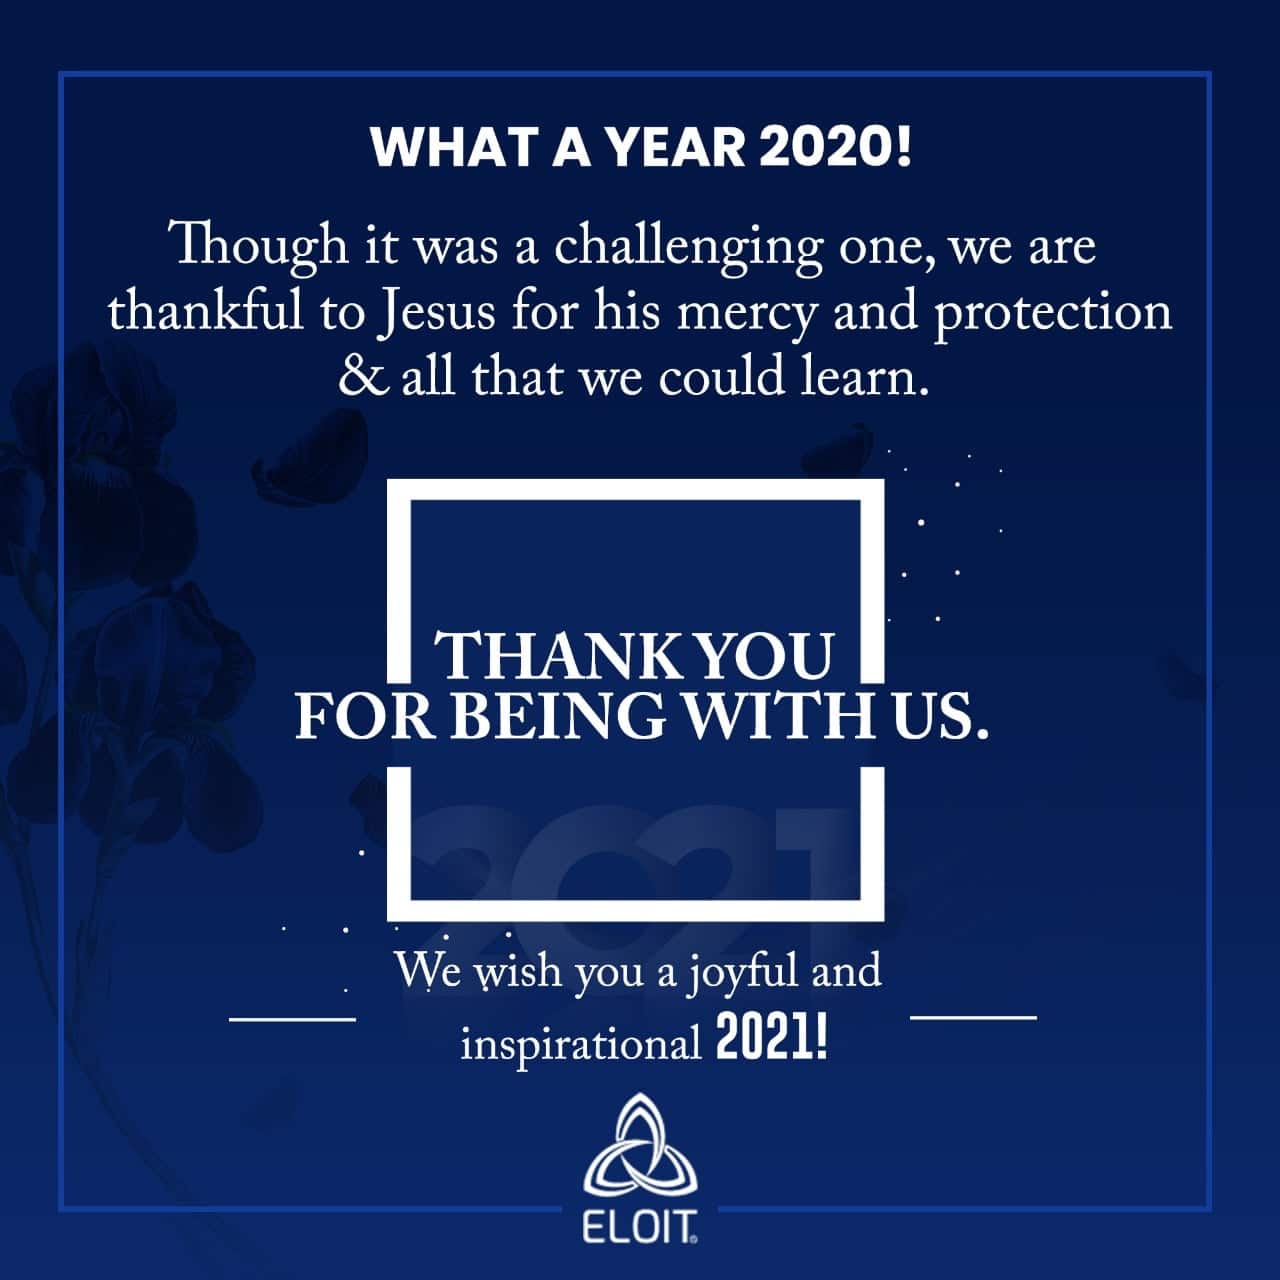 WHAT A YEAR 2020! – At Eloit, we are thankful to Jesus for his mercy and protection & all that we could learn!